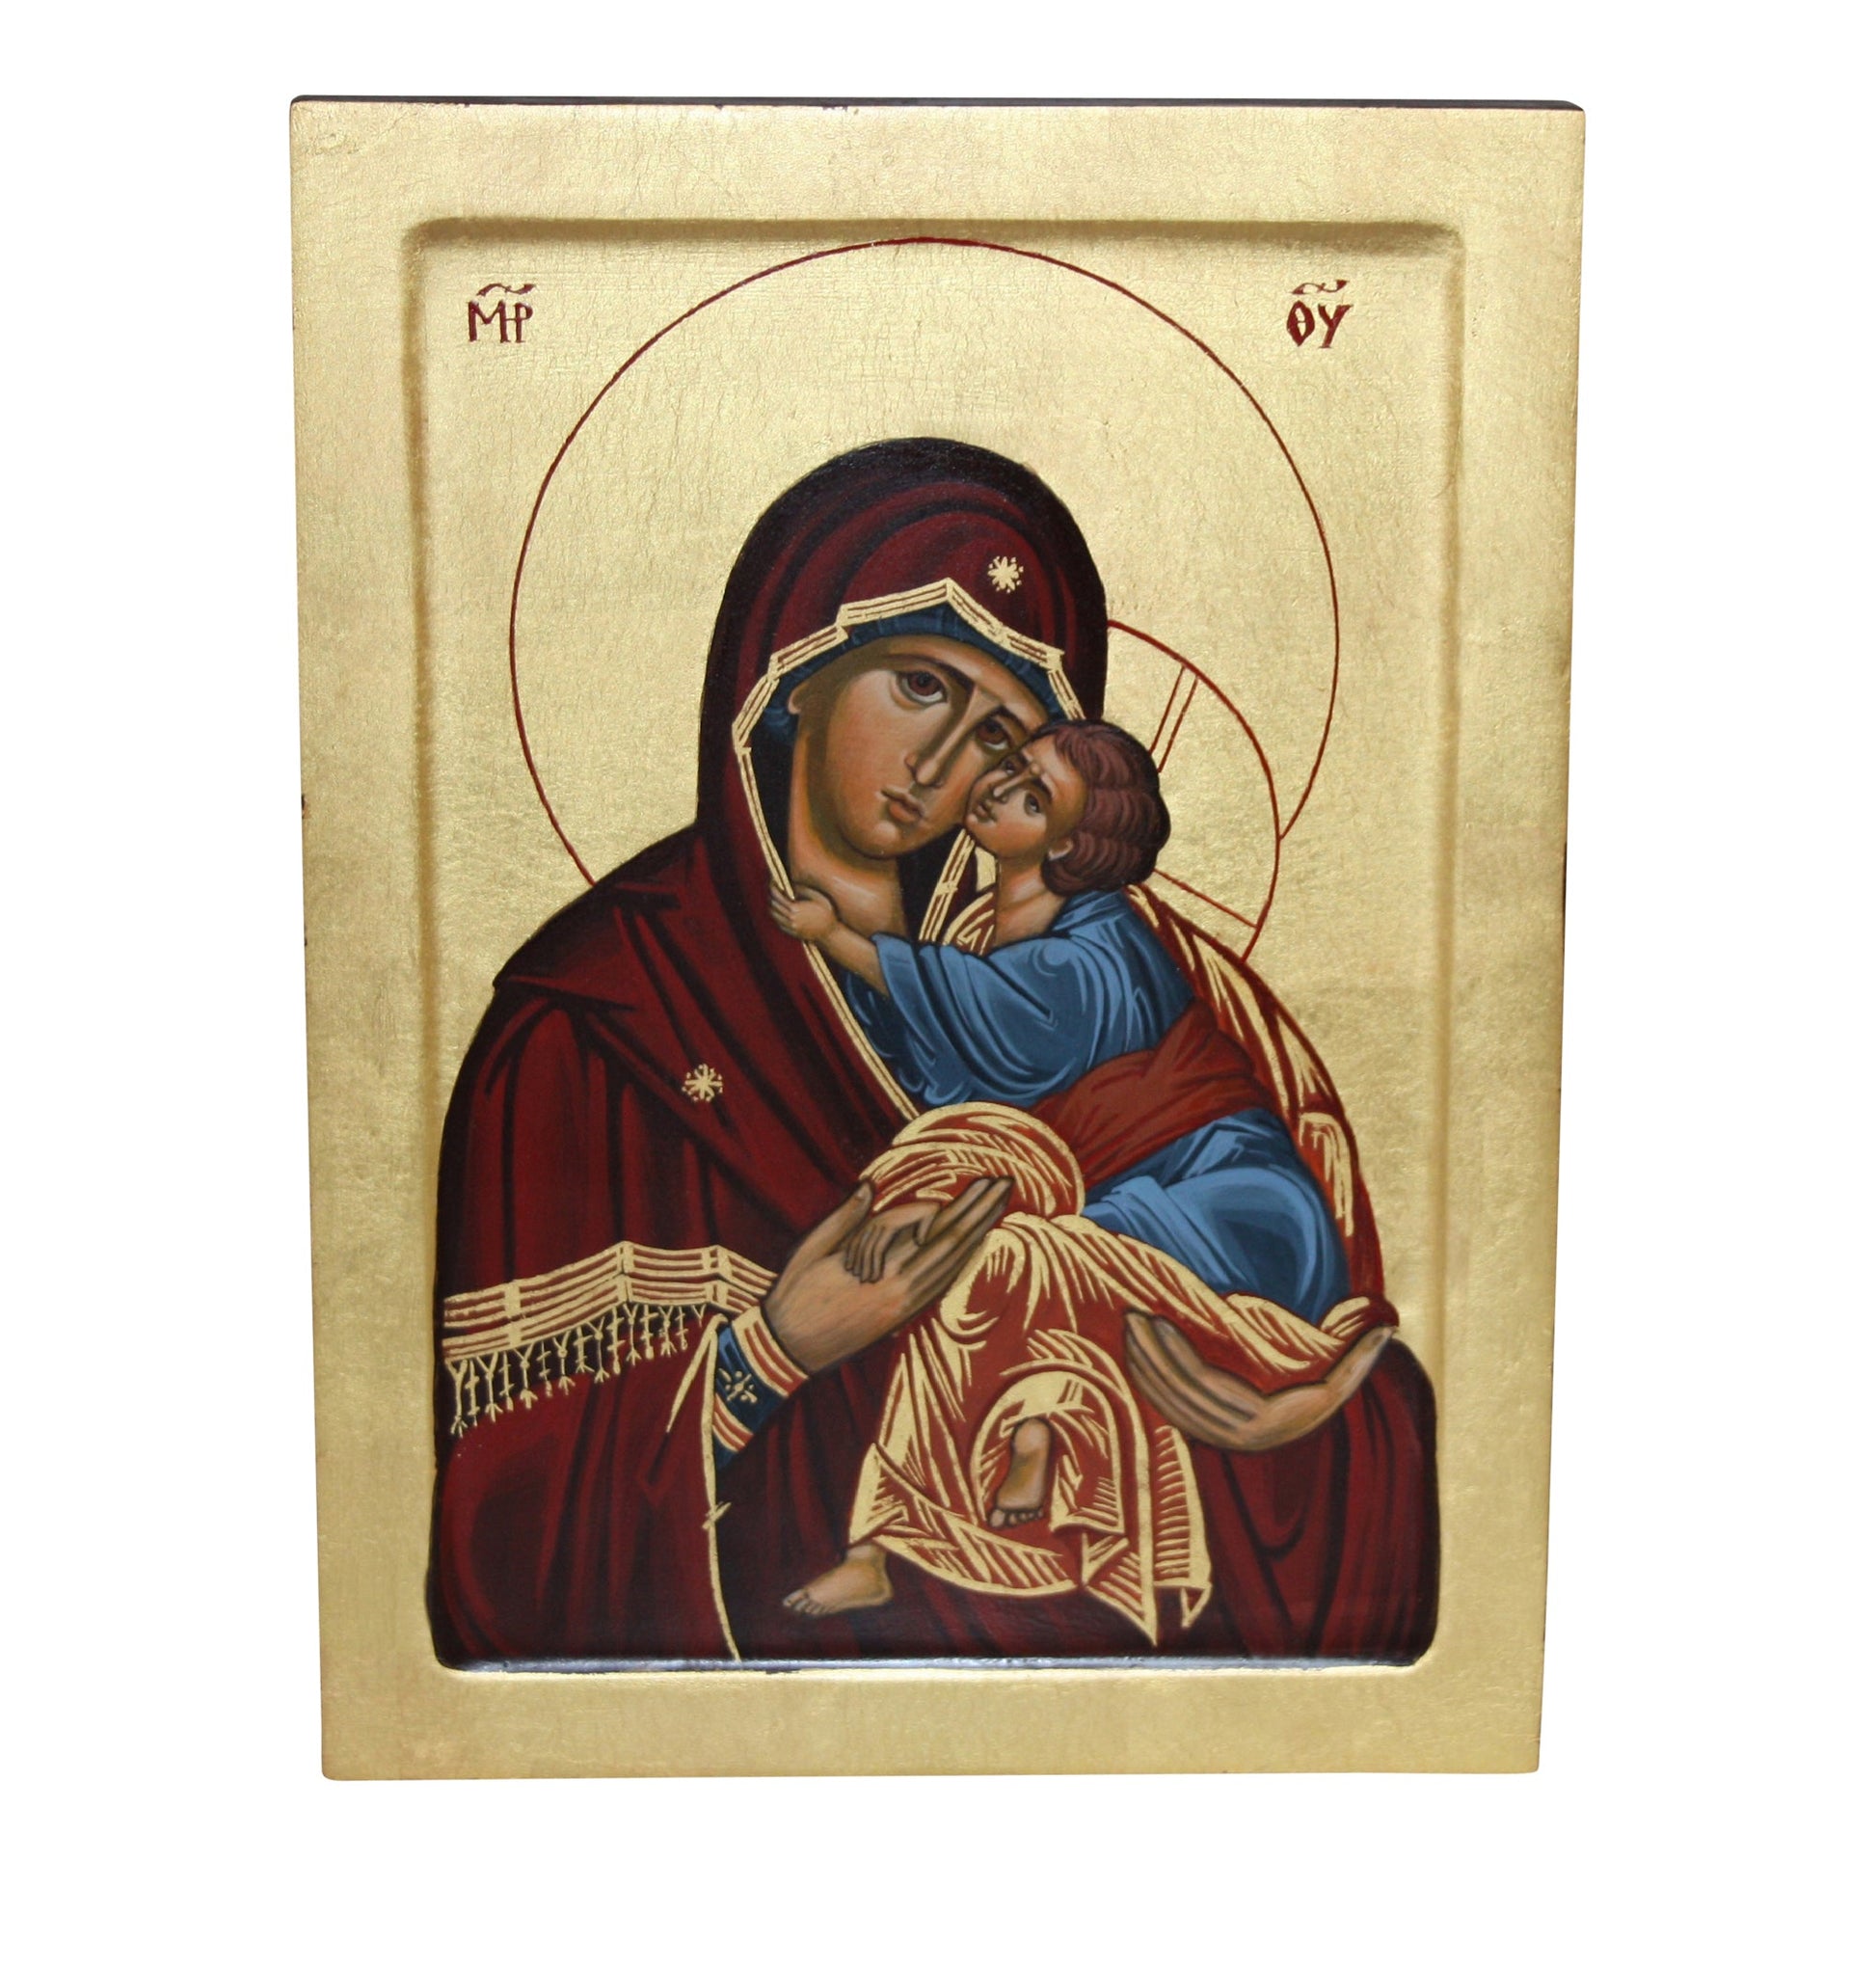 Hand-painted Eastern Orthodox icon of the Virgin Mary and Child Jesus. Mary, in a deep red robe with golden patterns and a dark veil, holds Jesus, wearing a blue tunic with gold trim. Both have golden halos, Mary's inscribed with MP ΘΥ, and Jesus' with ΟΩΝ. The background is gold leaf, with a simple gold border framing the icon.